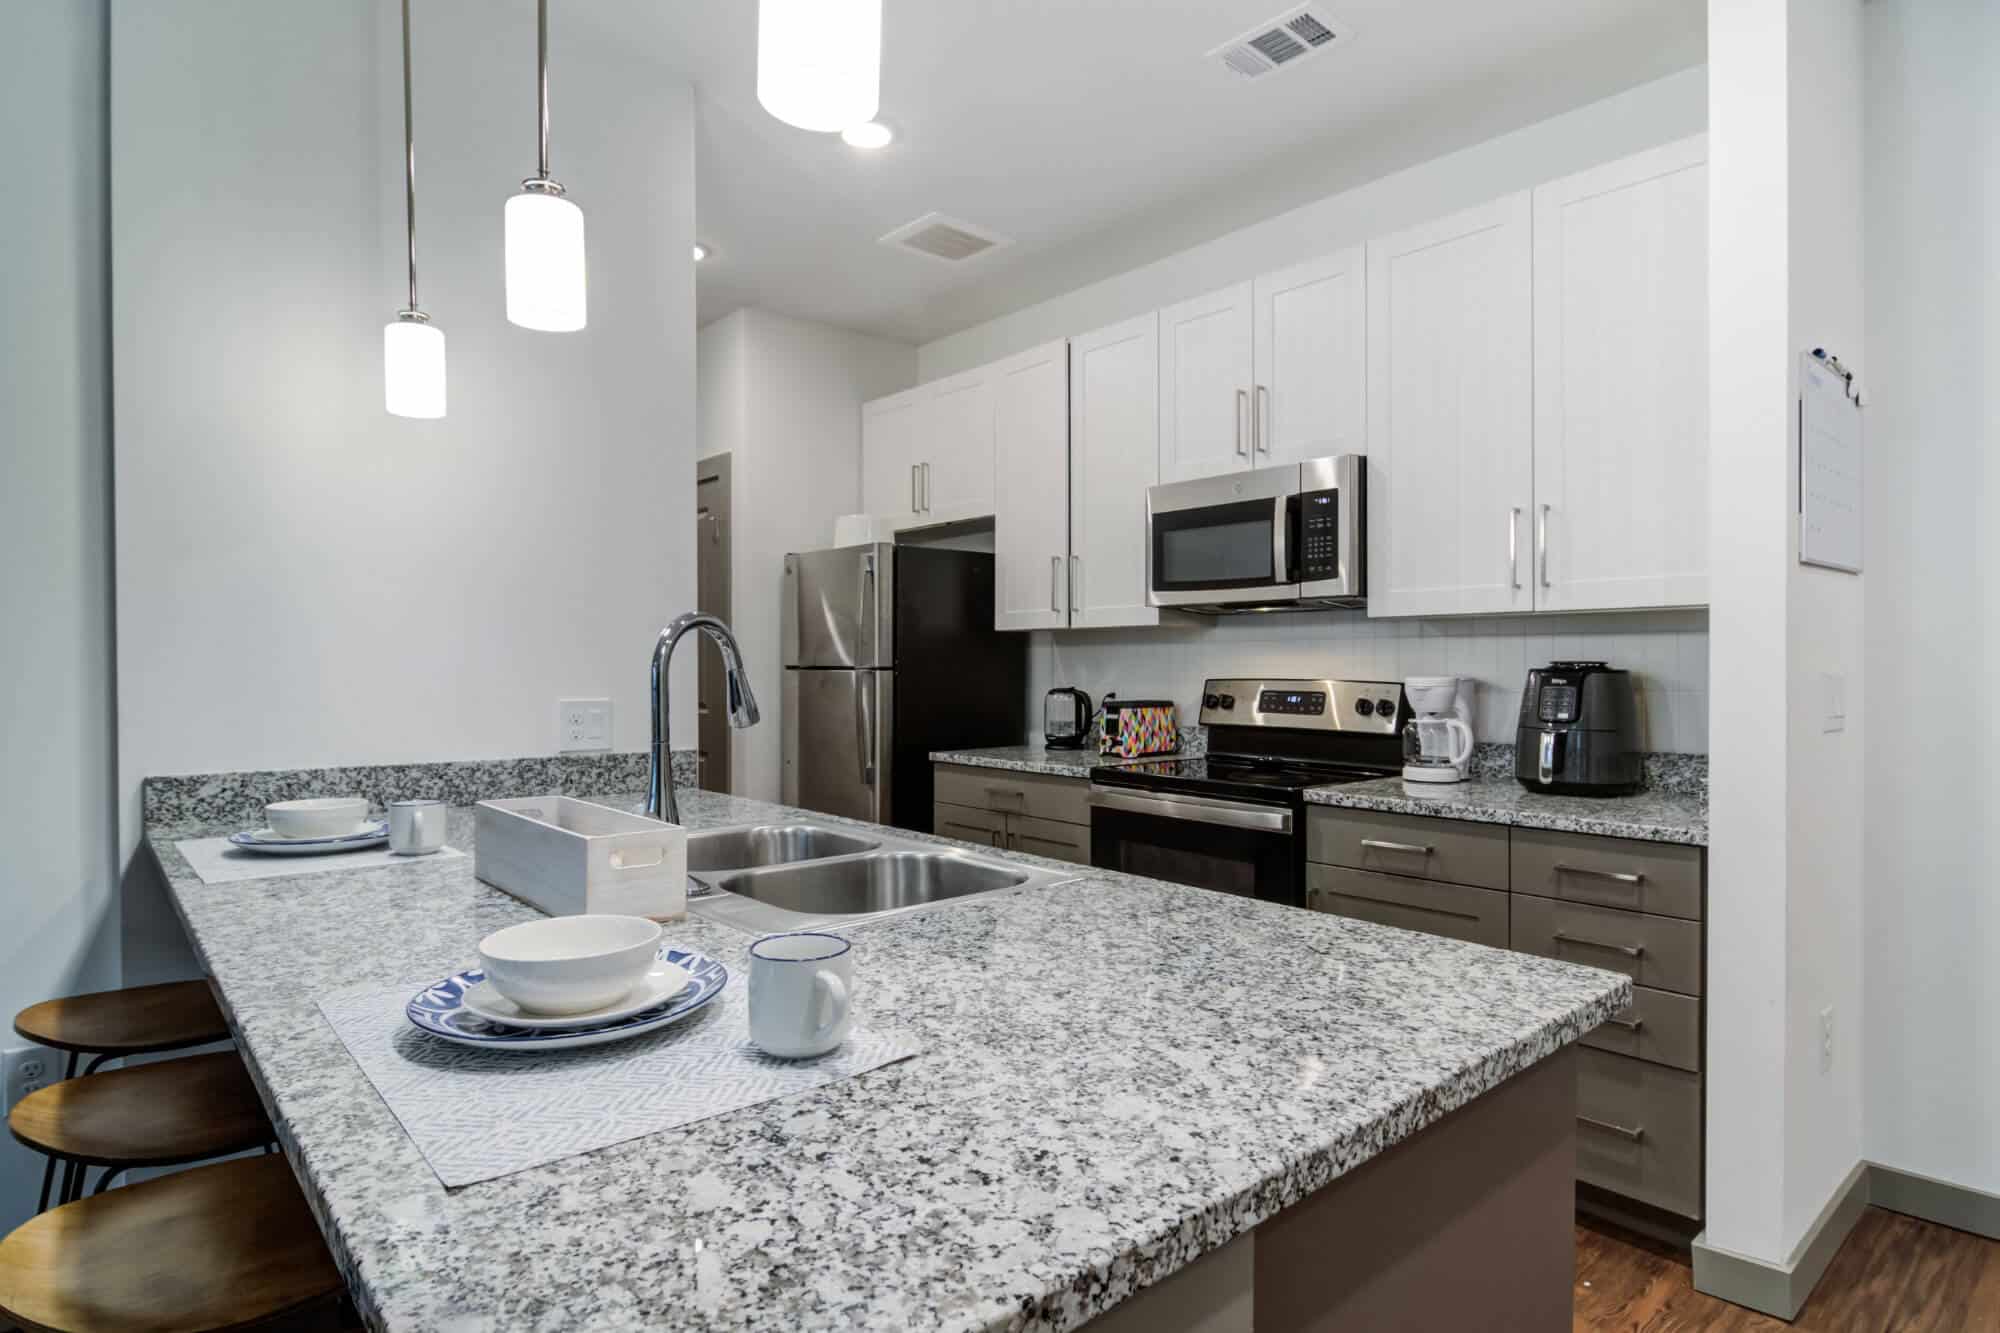 14 sixtyfive off campus apartments near kennesaw university spacious kitchen with breakfast bar granite countertops energy efficient stainless steel appliances